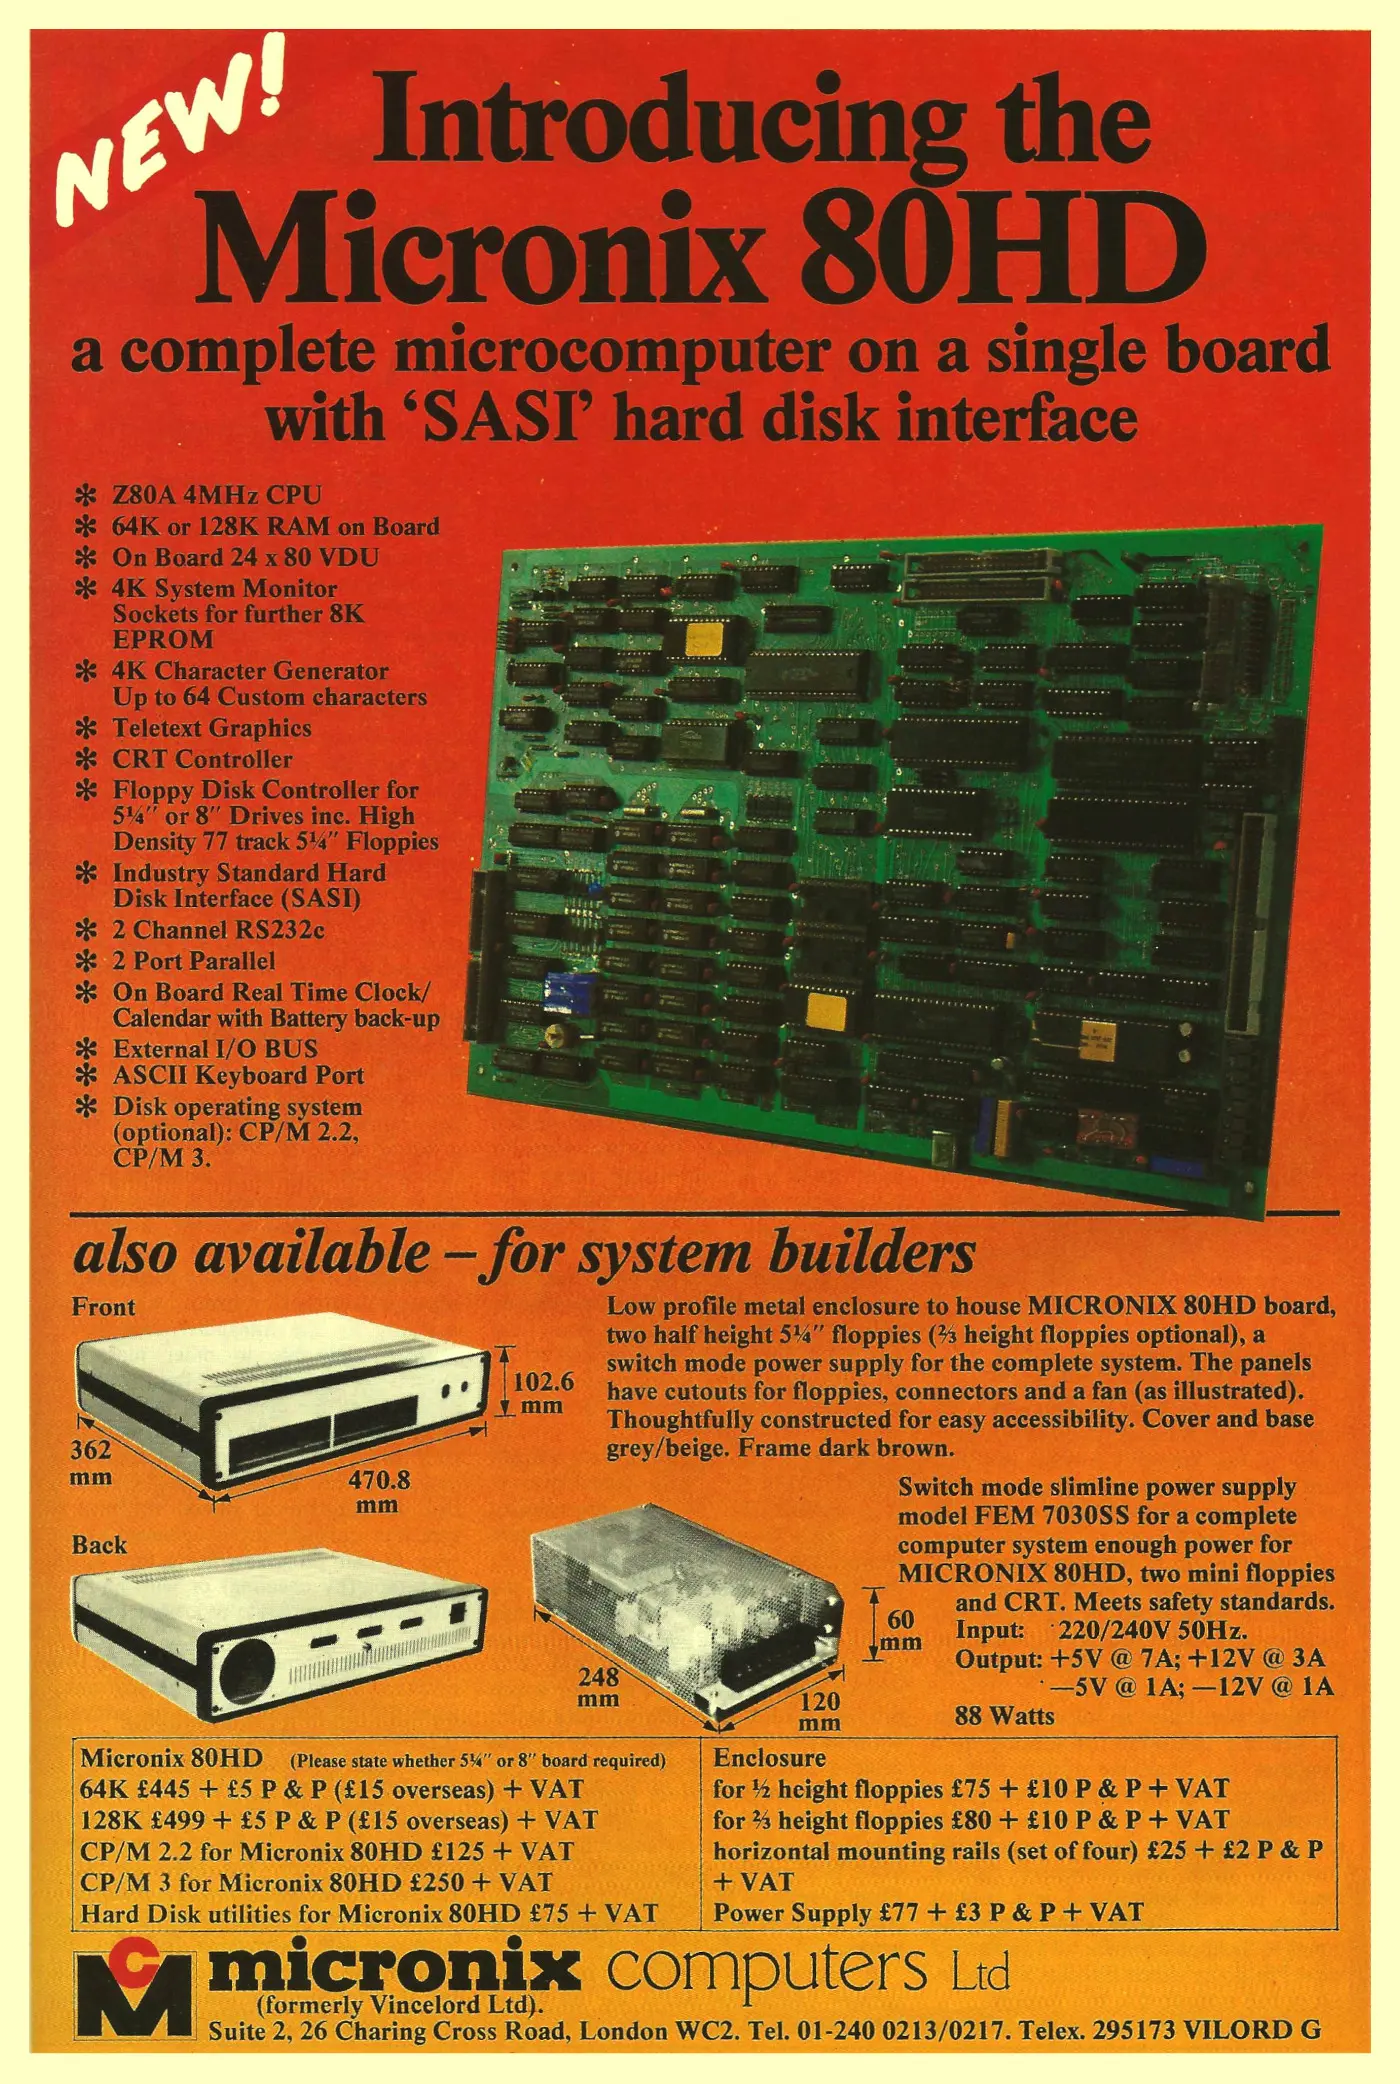 Micronix Advert: Introducing the Micronix 80HD - a complete microcomputer on a single board, from Practical Computing, June 1983